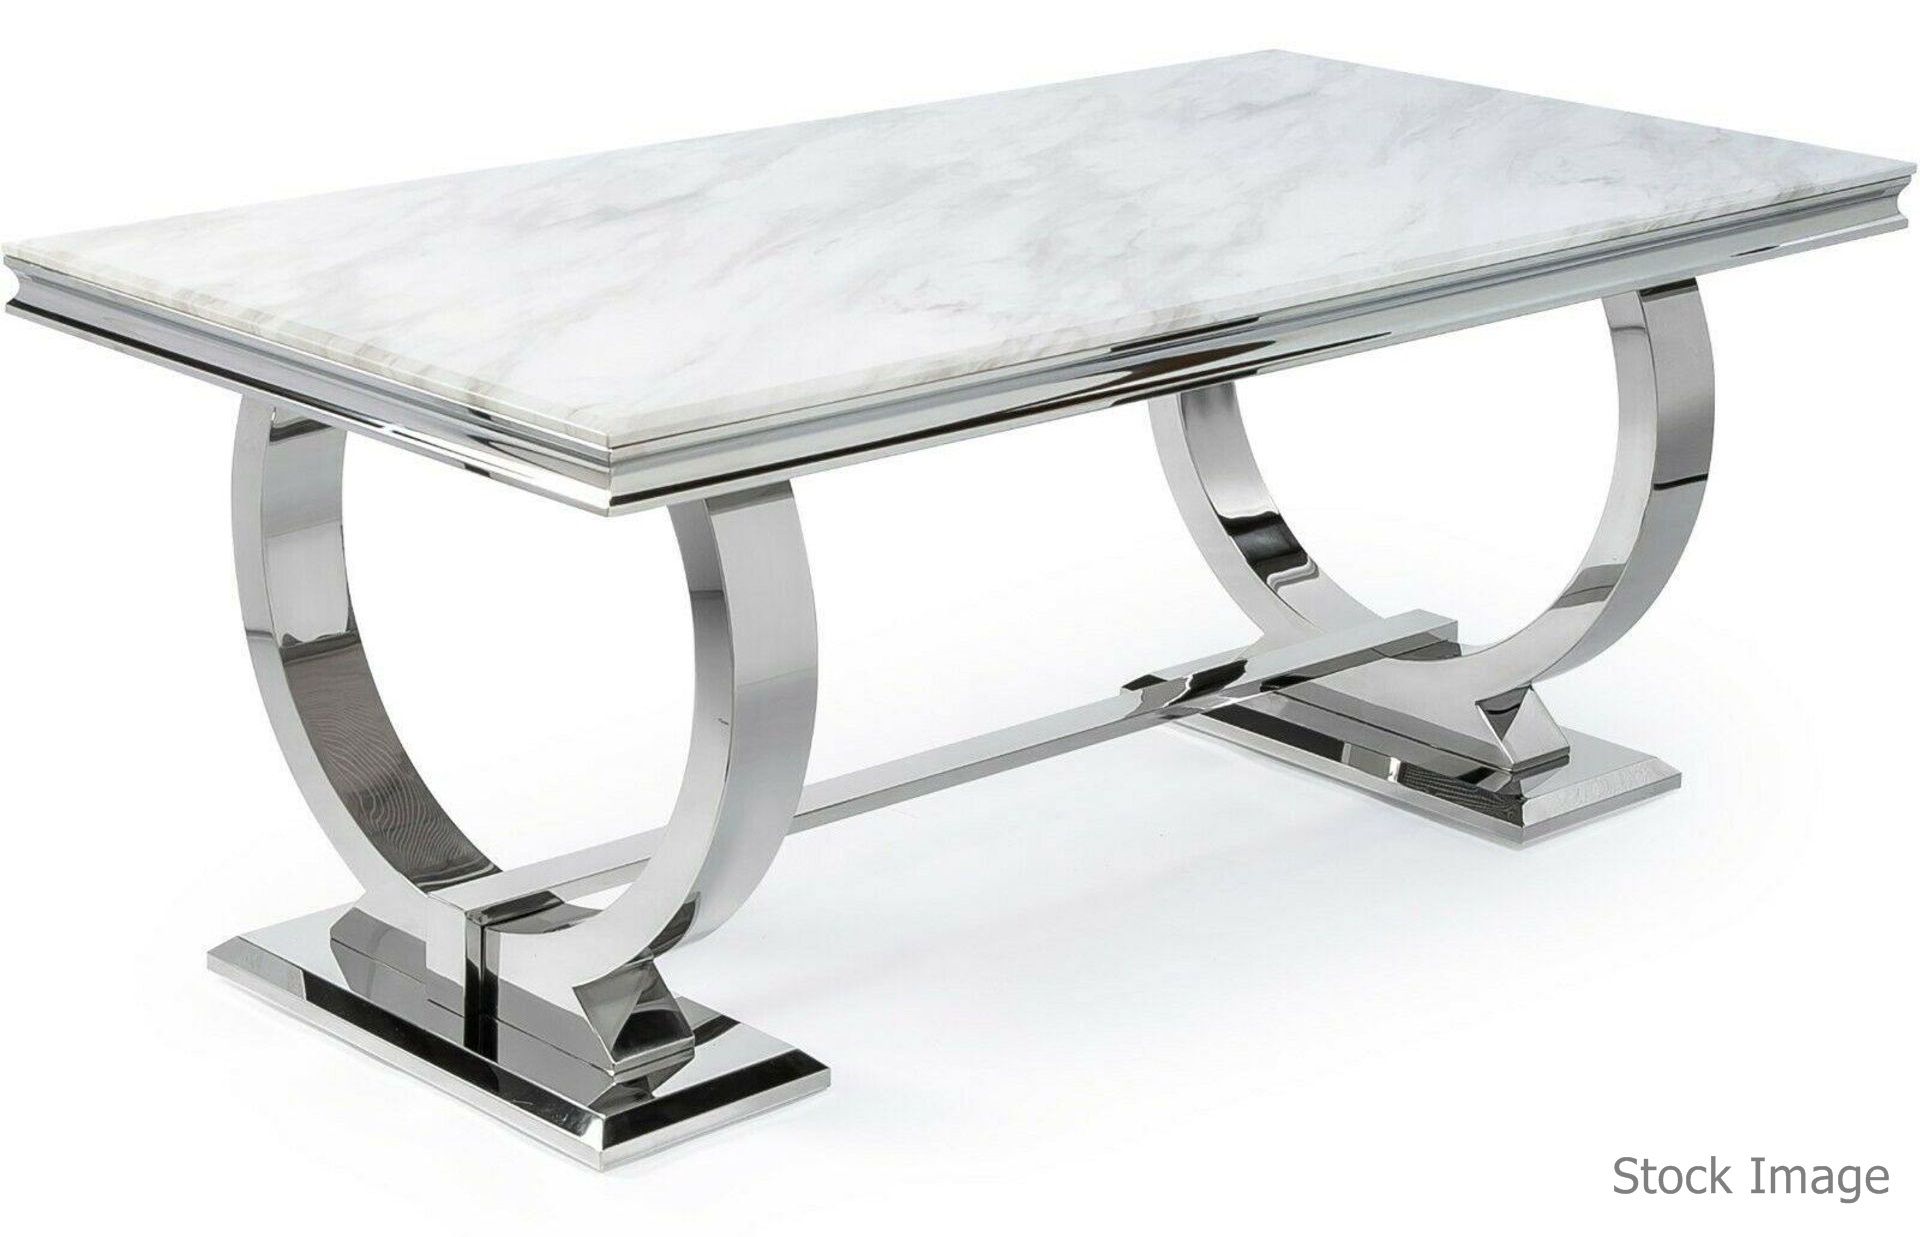 1 x Arianna 2-Metre Long Dining Table With Marble Top With A Chrome Base - Image 4 of 12